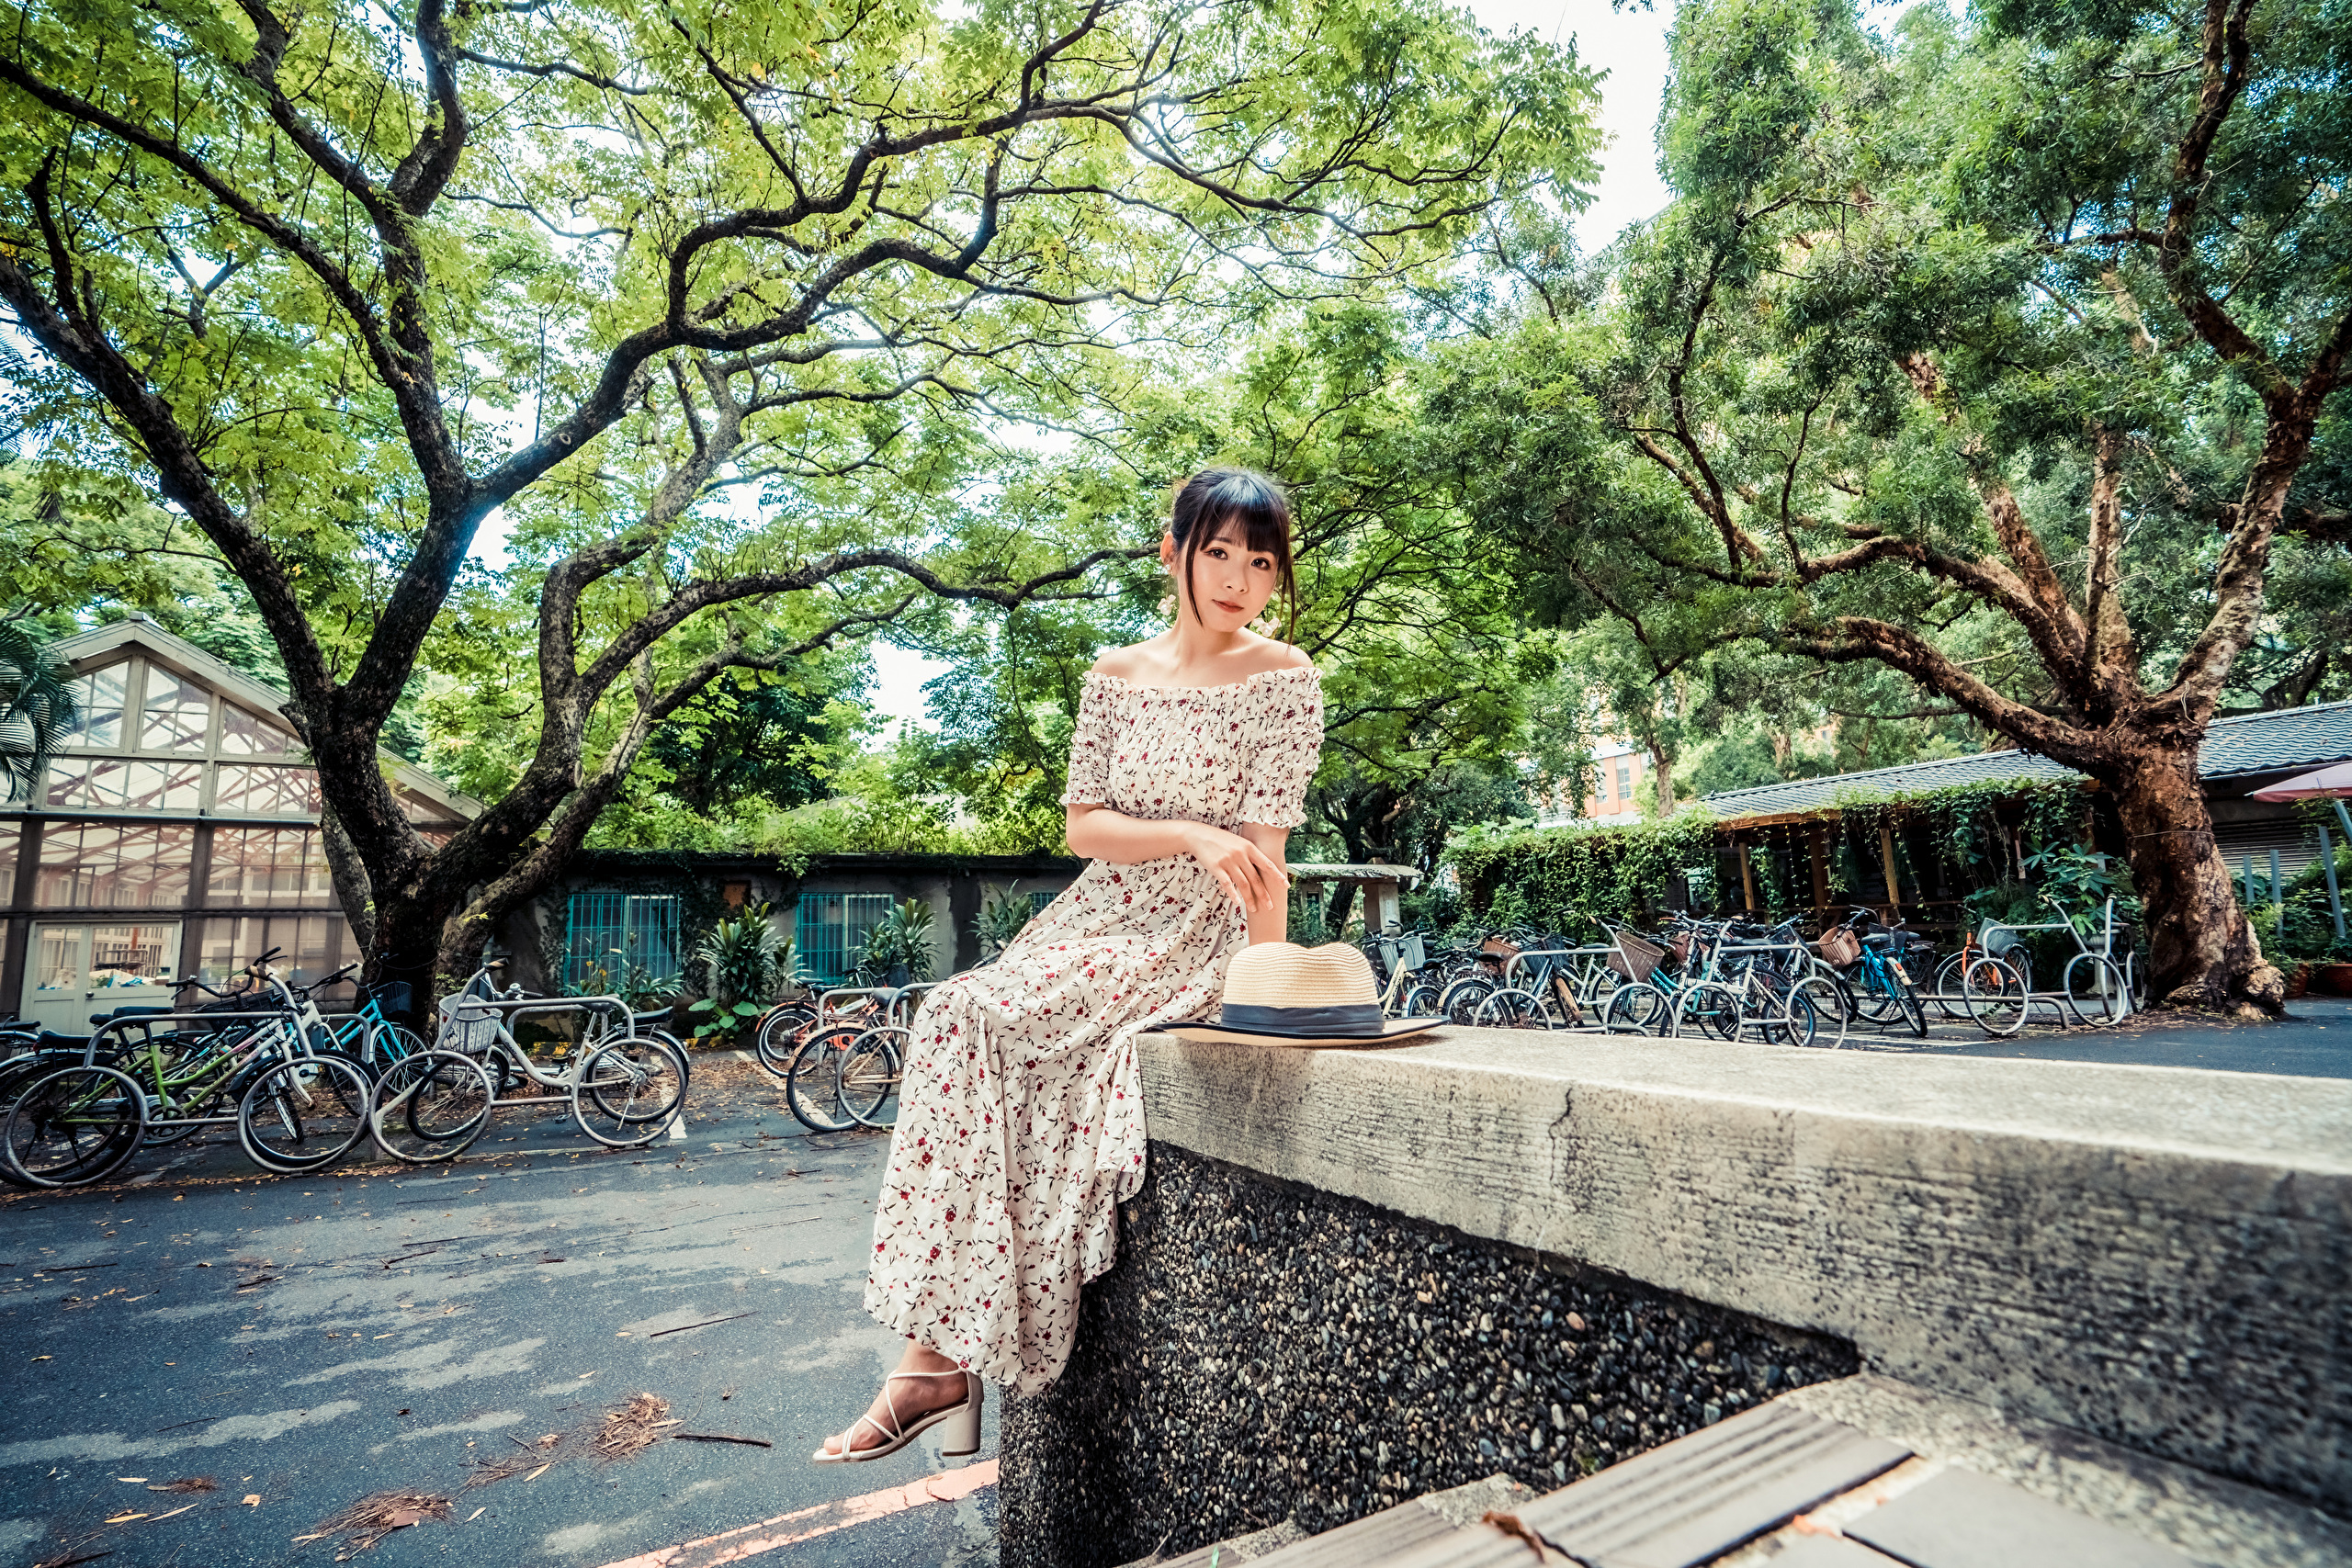 People 2560x1707 Asian model women women outdoors long hair dark hair trees flower dress bare shoulders ponytail straw hat barefoot sandal stairs wall sitting greenhouse bicycle